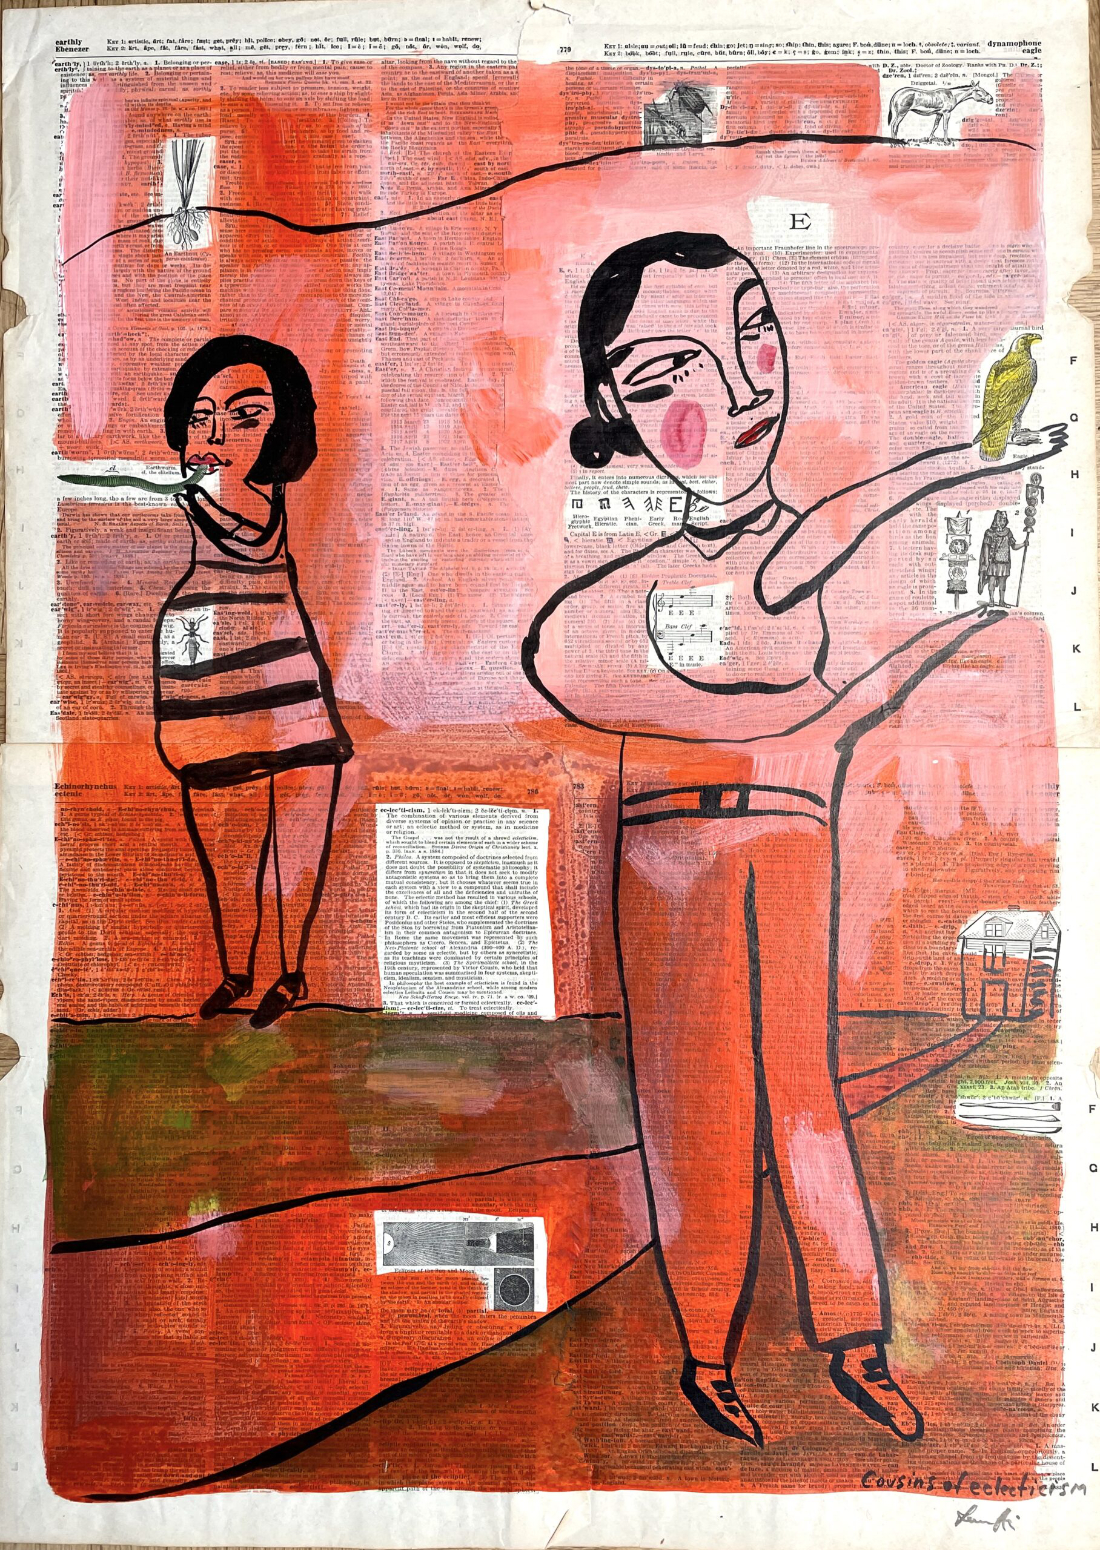 two hand-drawn figures of women on a painted-over dictionary page